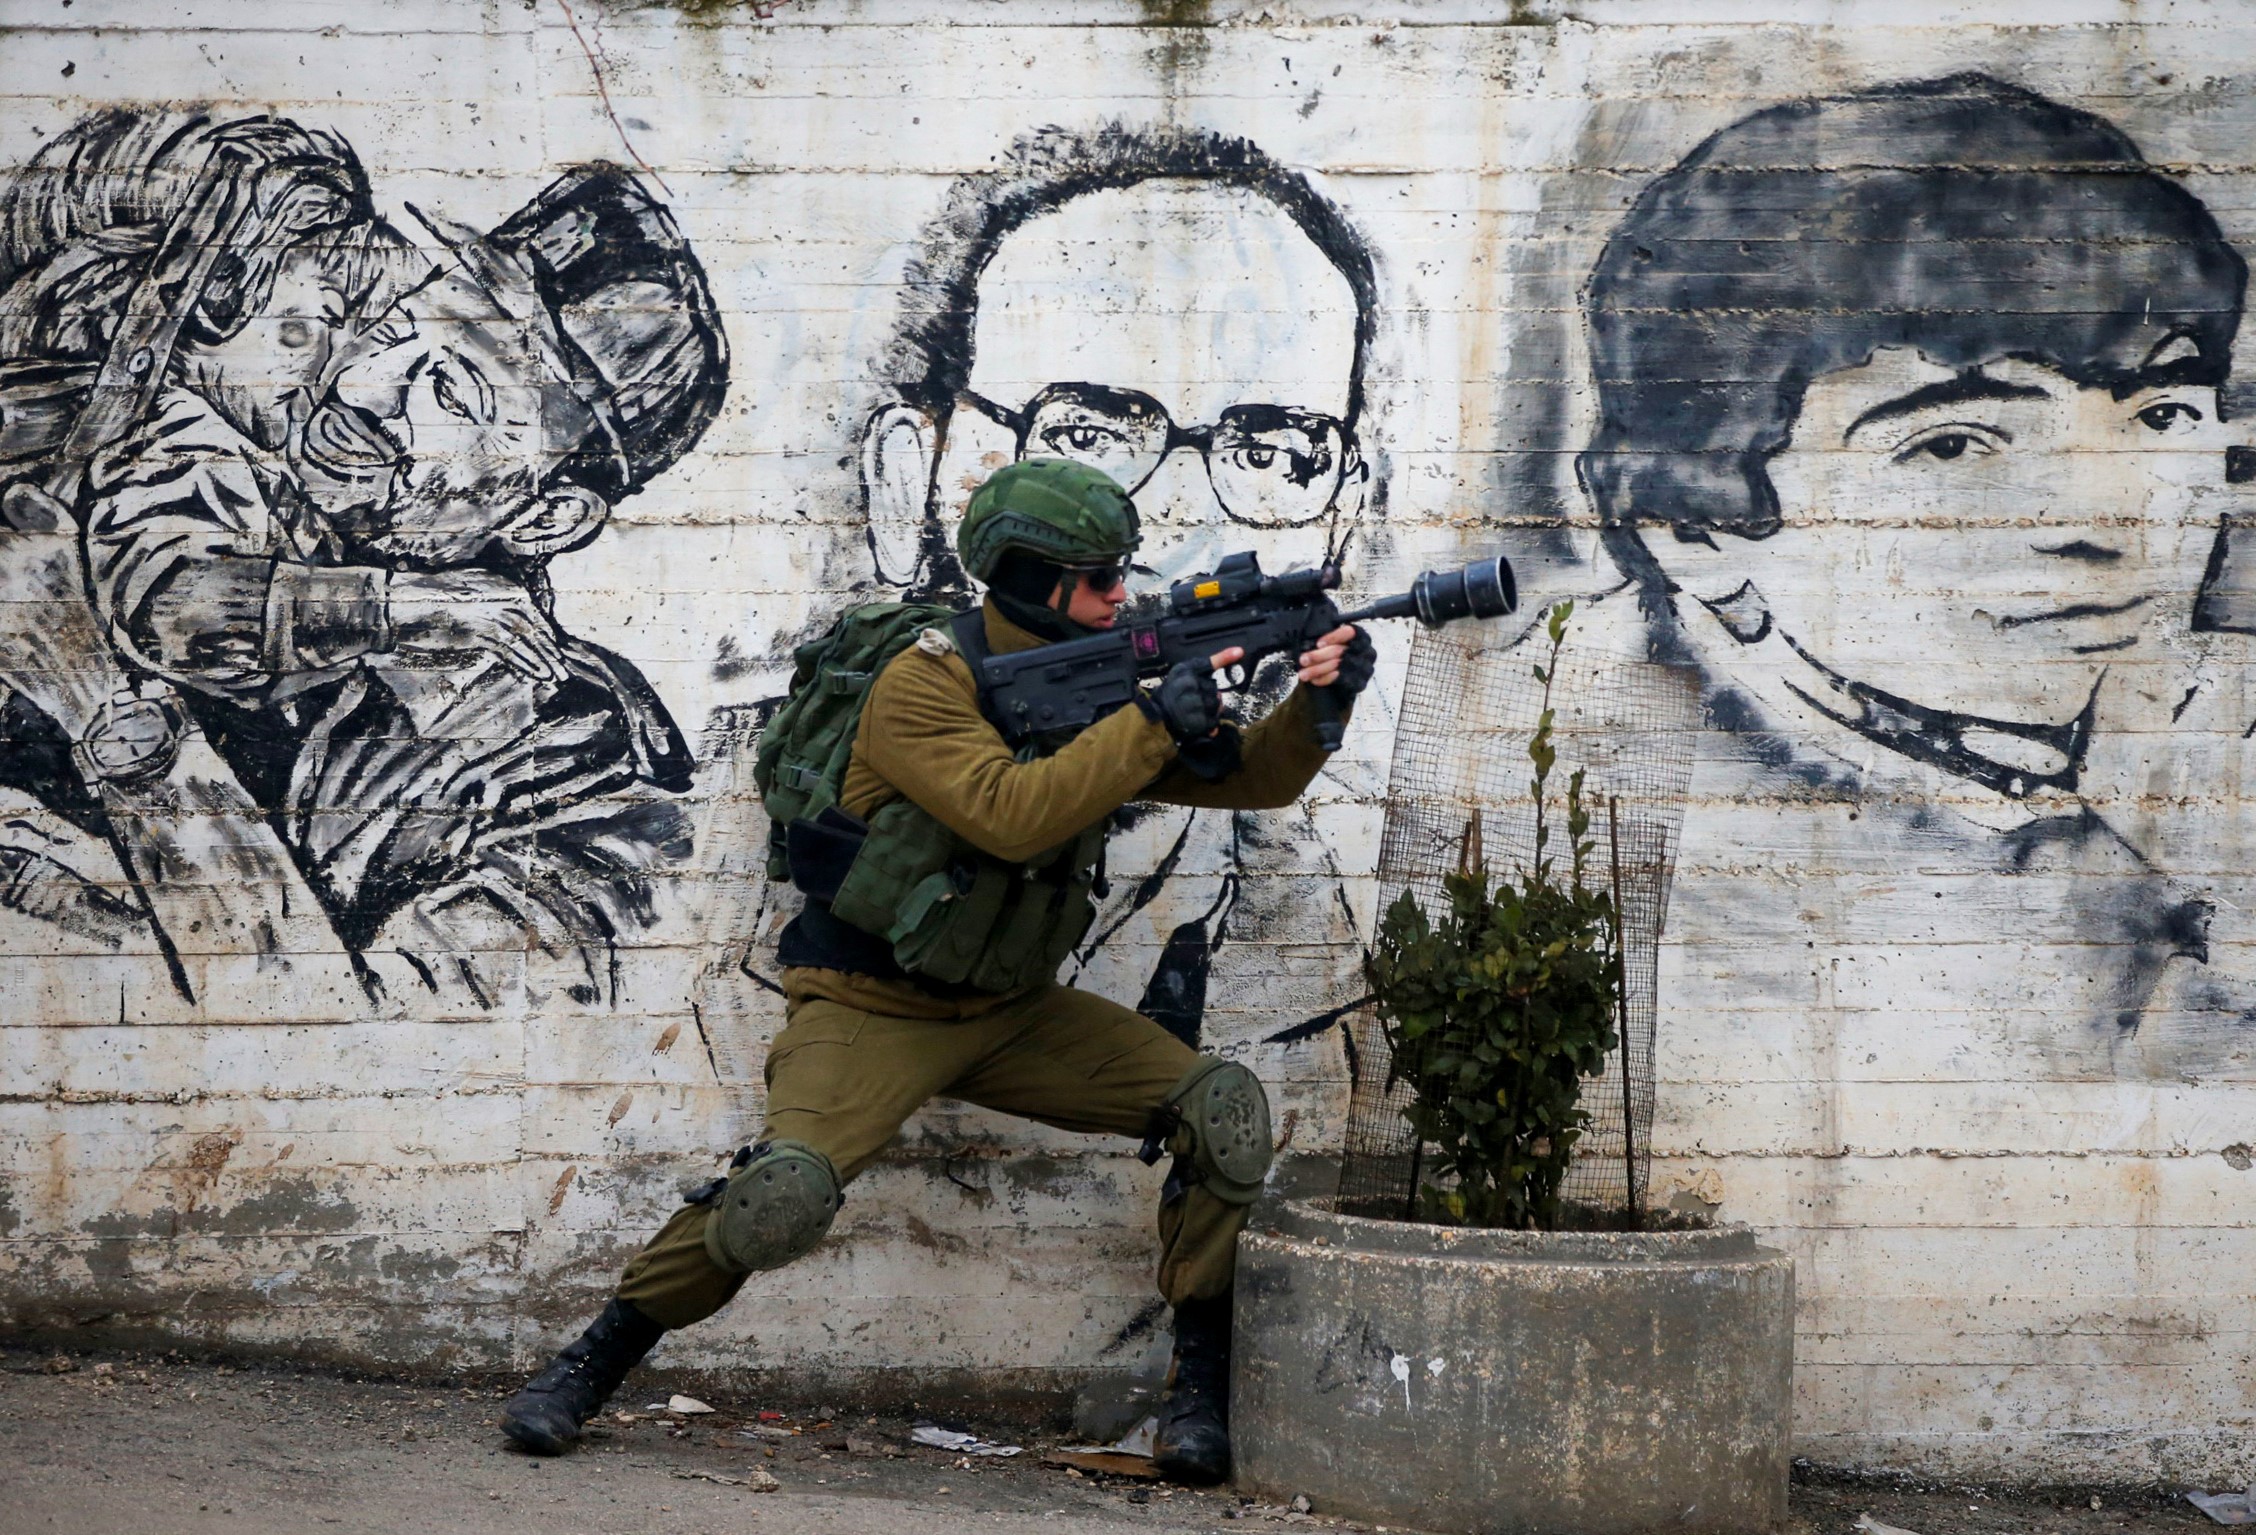 An Israeli soldier fires teargas towards Palestinian demonstrators during a demonstration in al-Aroub Palestinian refugee camp, between the West Bank towns of Hebron and Bethlehem, on January 29, 2020